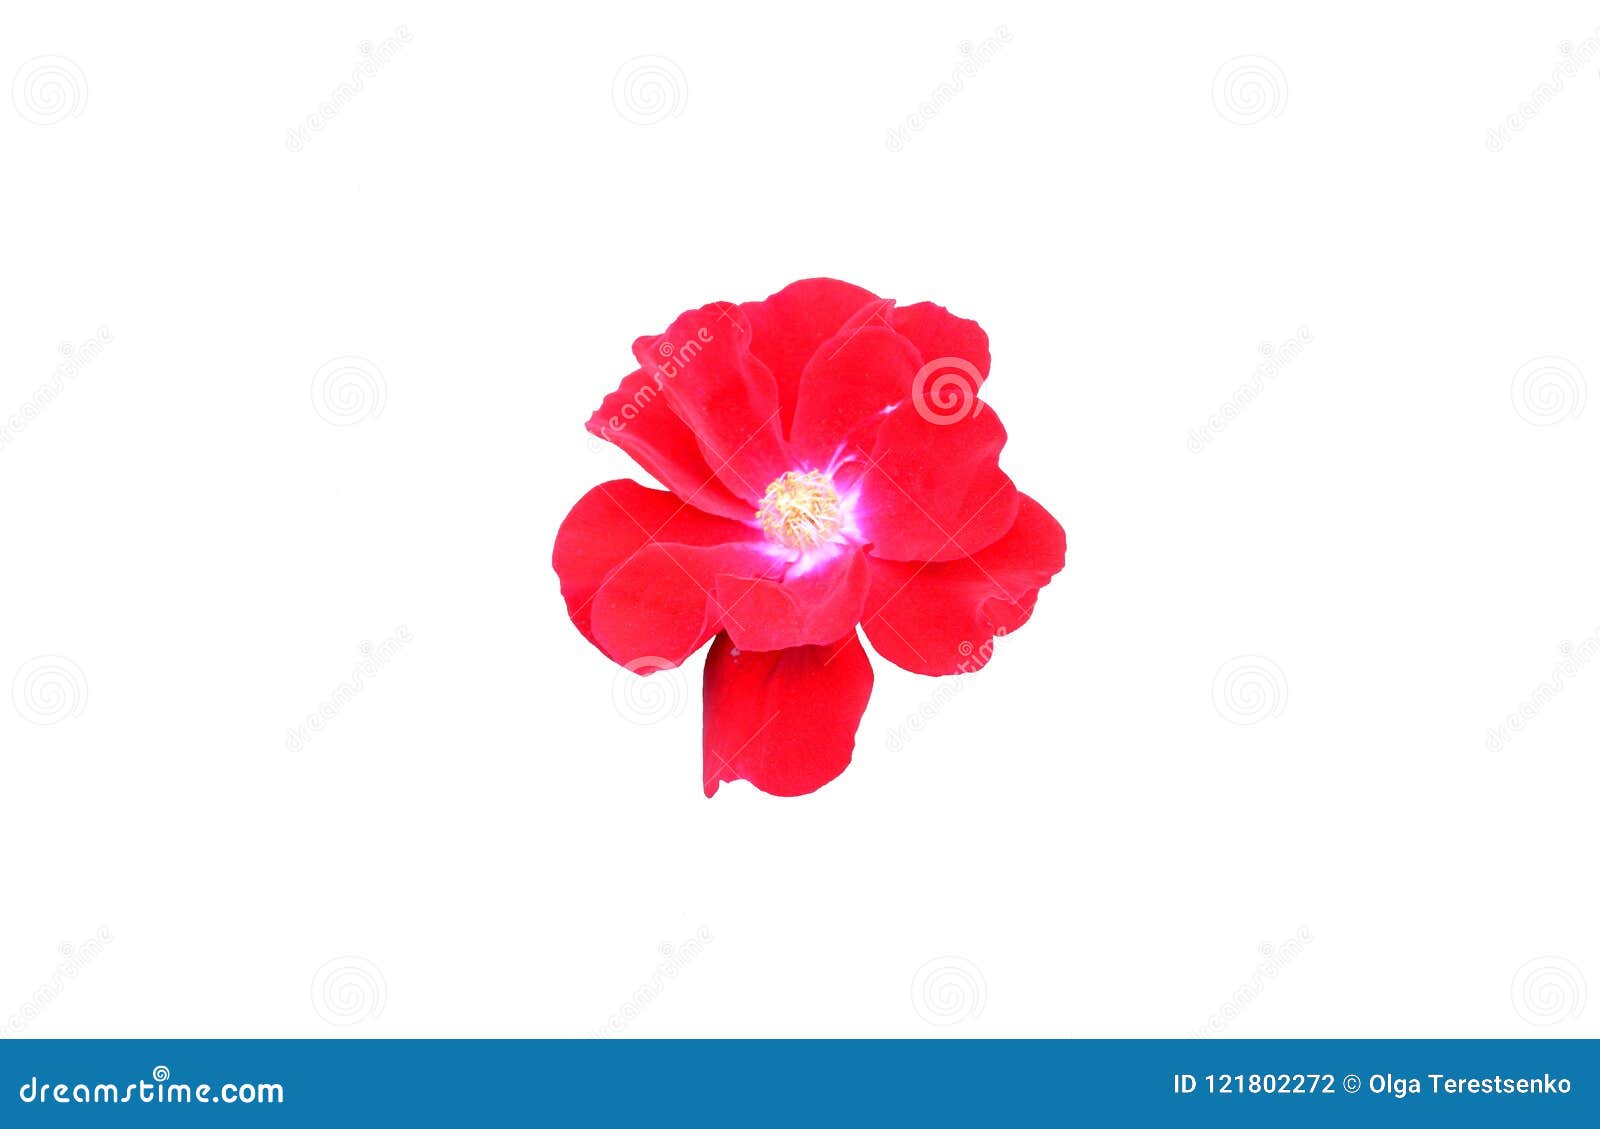 An Isolated Red Flower On White Background Stock Photo - Image of petal